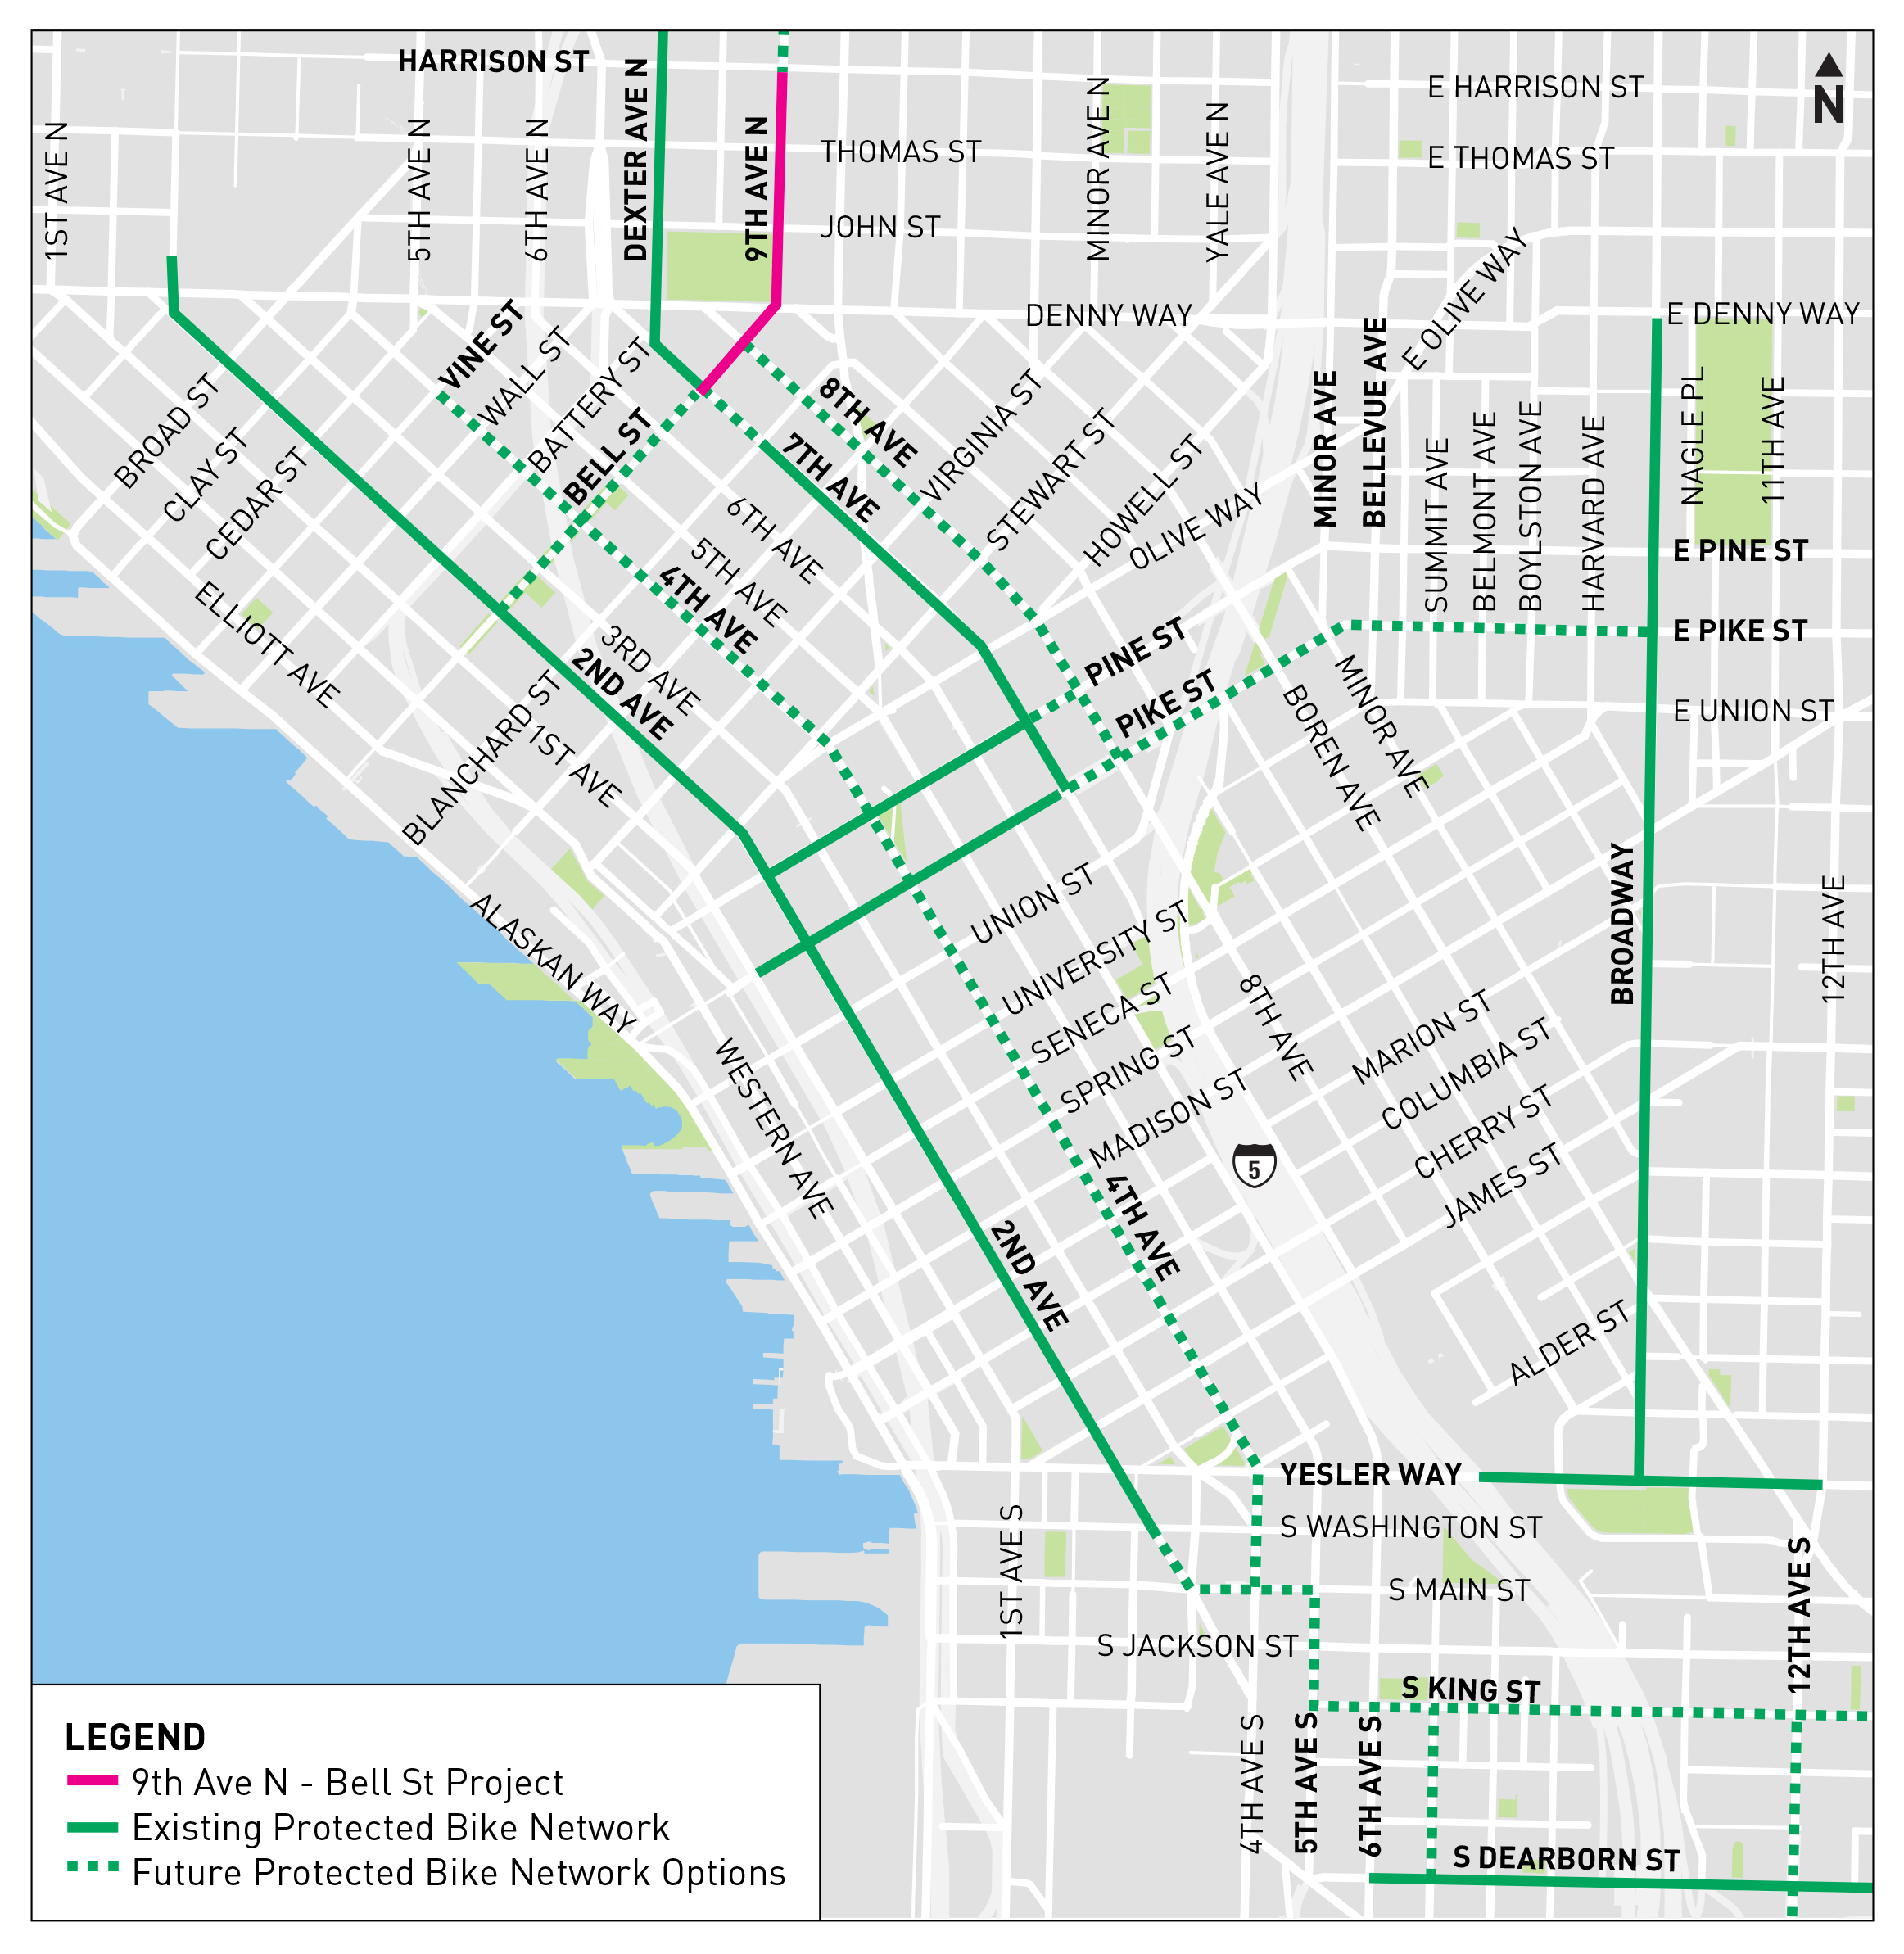 9th Ave N Mobility Improvements project context map